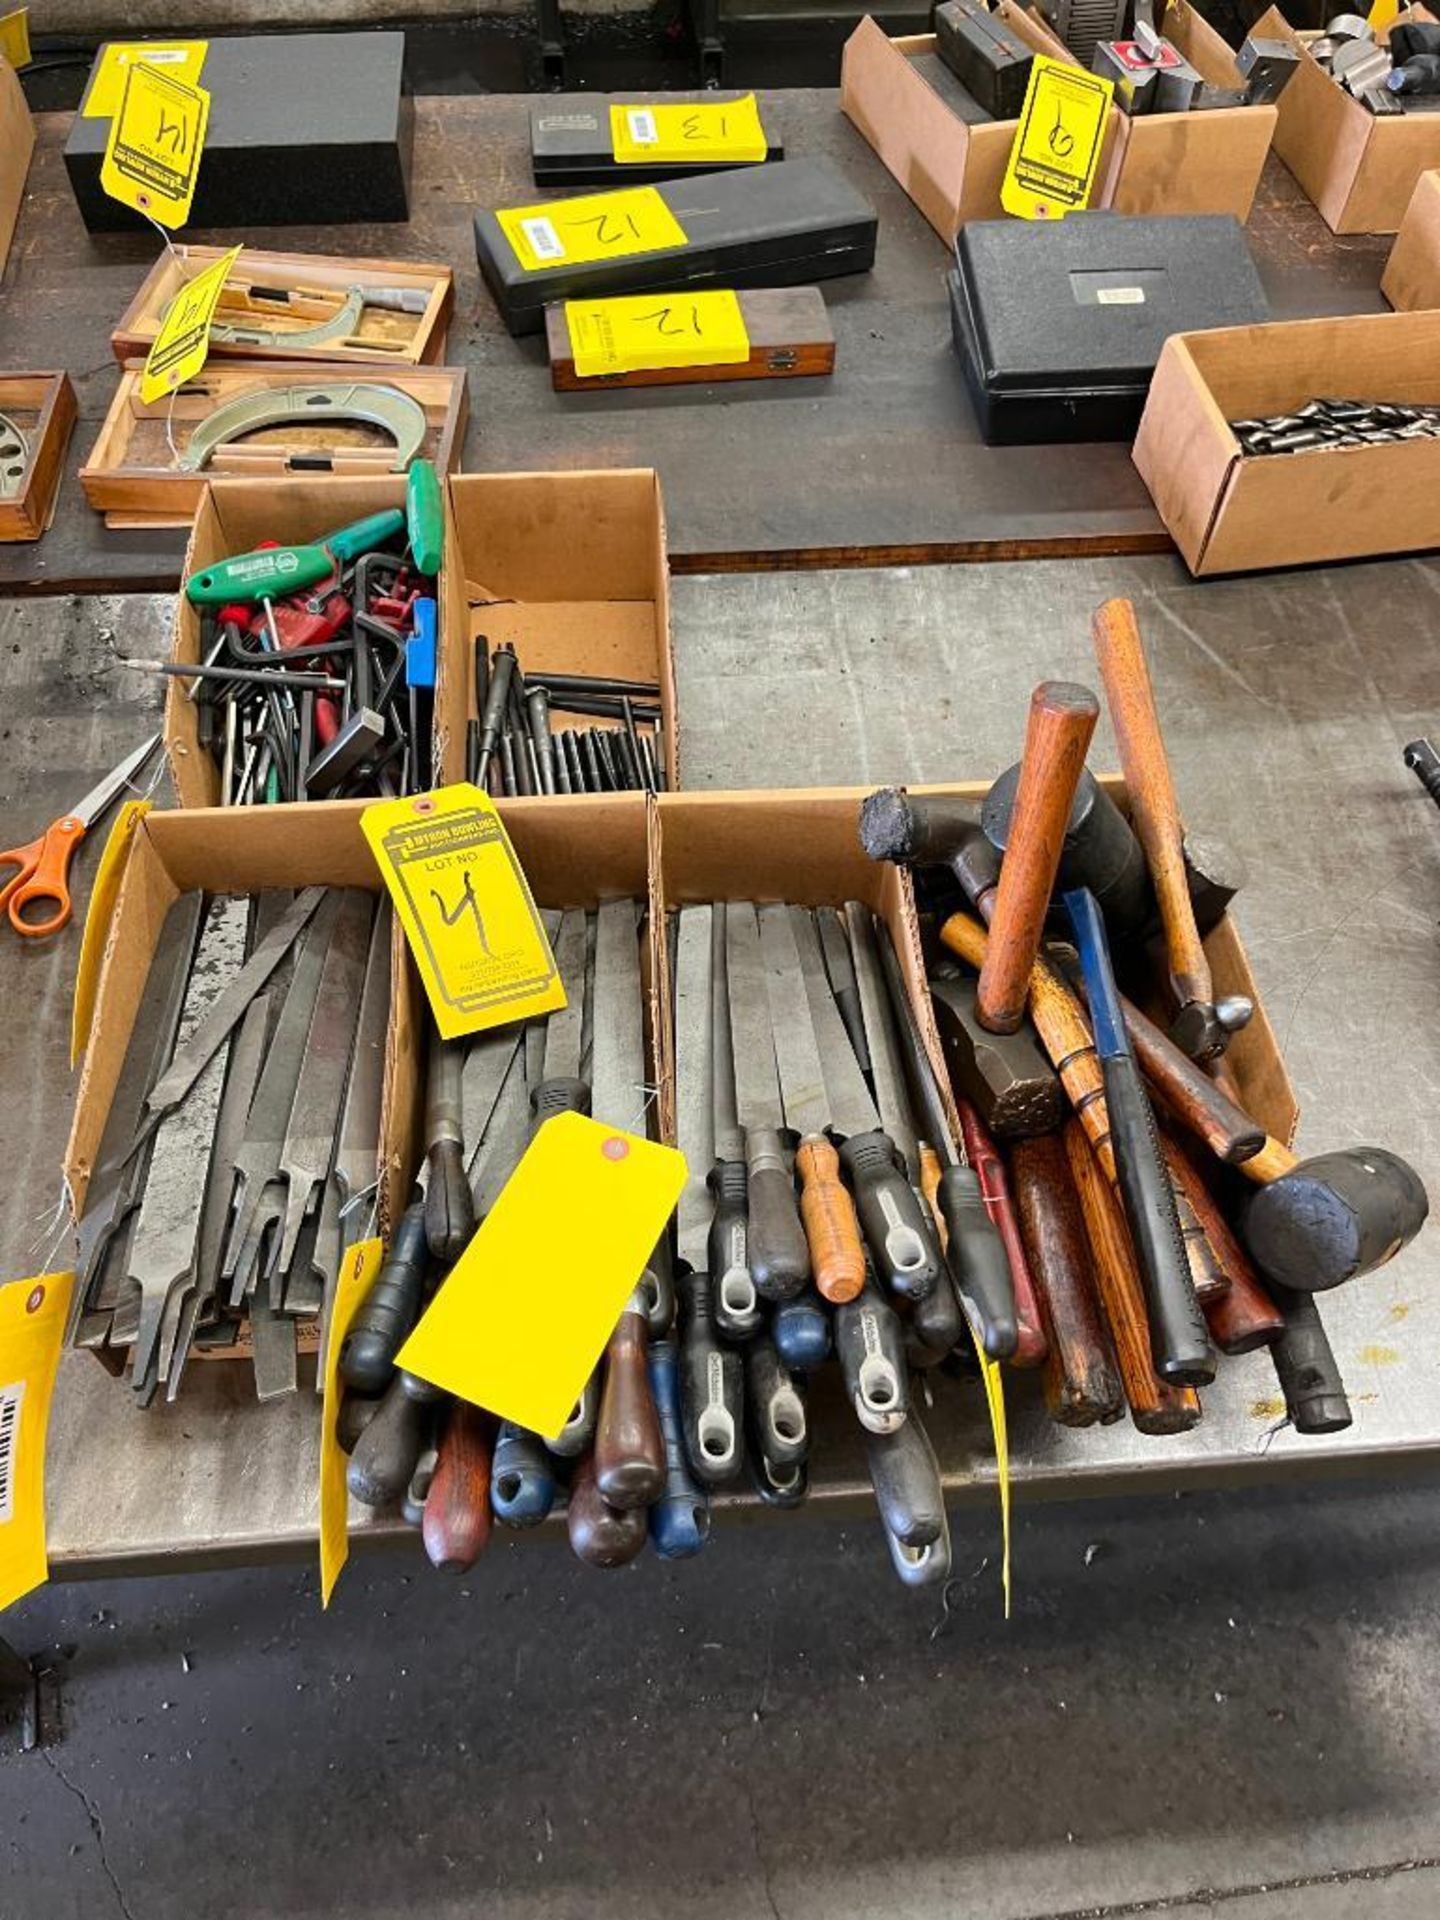 (6) boxes of assorted hand tools, files, hammers, allen wrenches, & punches